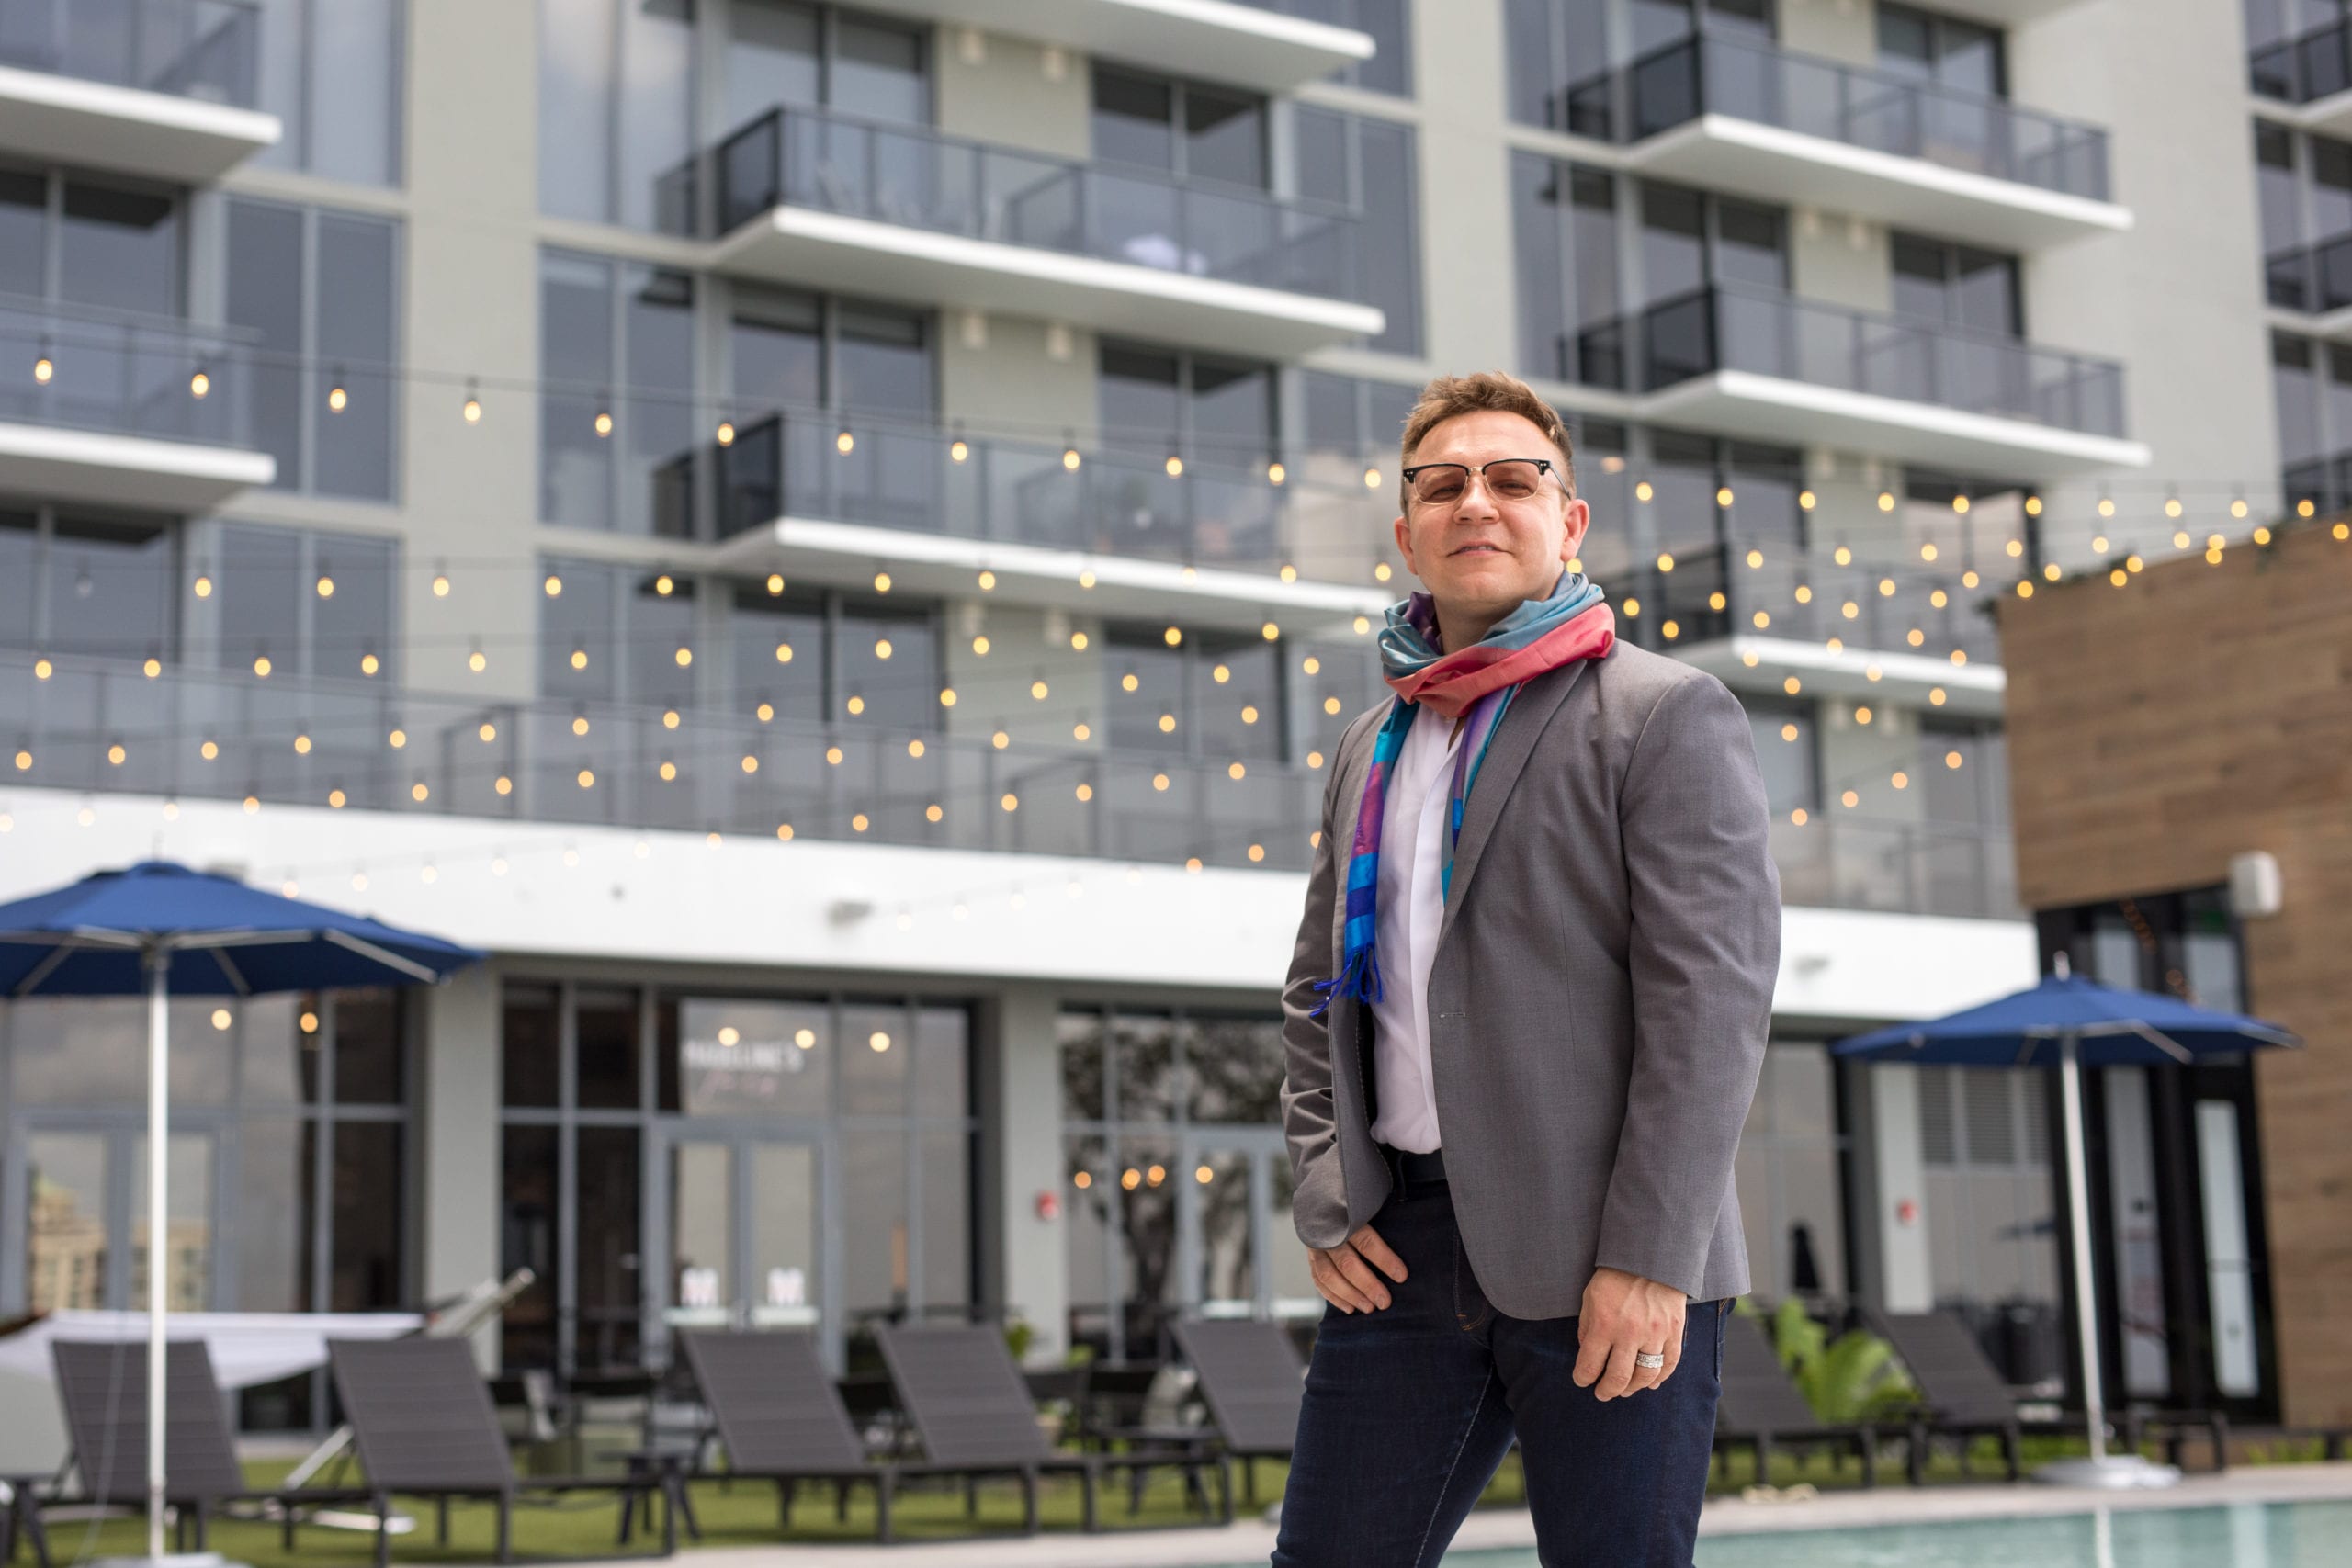 Fort Lauderdale Illustrated Men of Style Side profile closeup of man wearing glasses, gray suit jacket and jeans and colorful scarf posing for the camera standing in front of a building